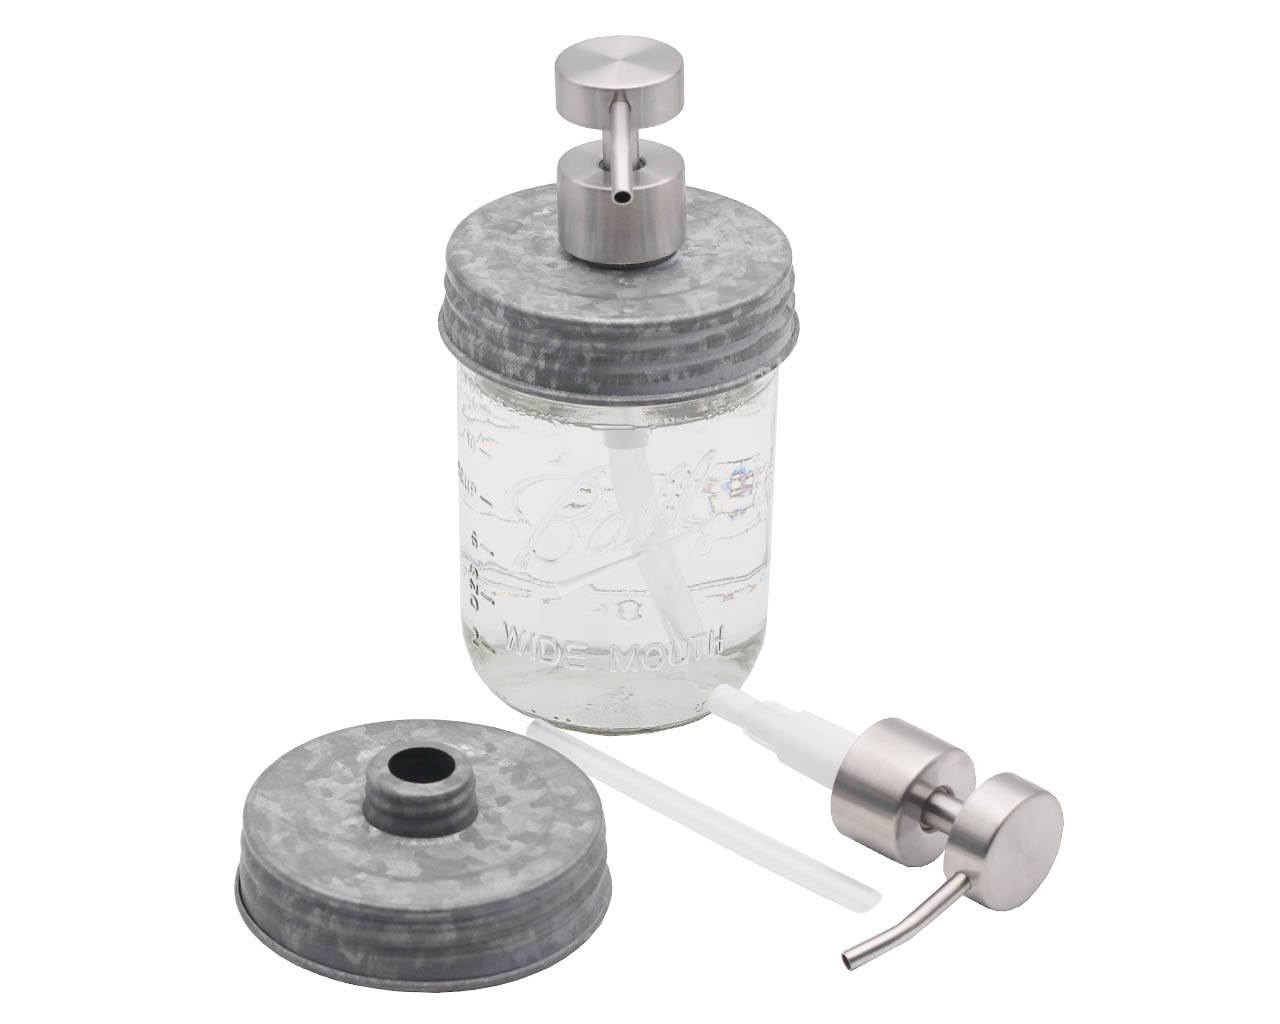 Threaded Brushed Stainless Steel/Matte Satin Soap Dispenser with Galvanized Lid for Wide Mouth Mason Jars Style #2